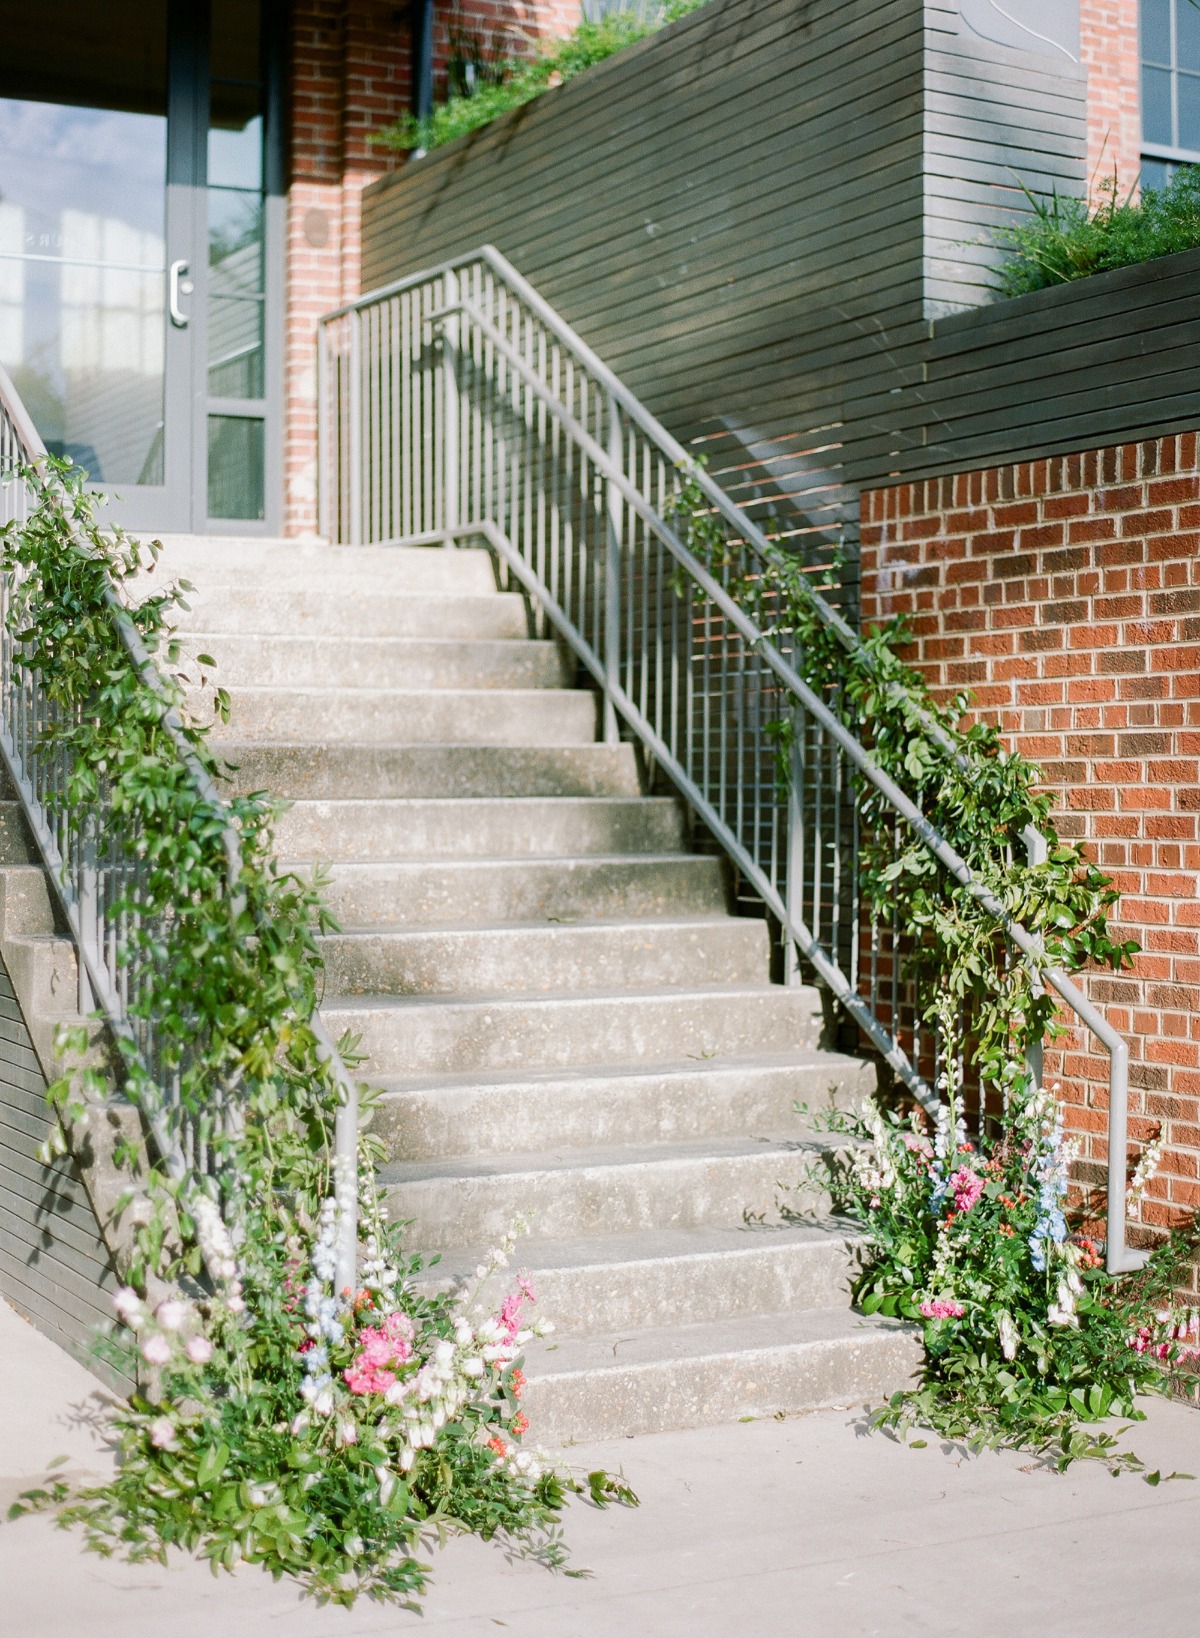 decorated stairs